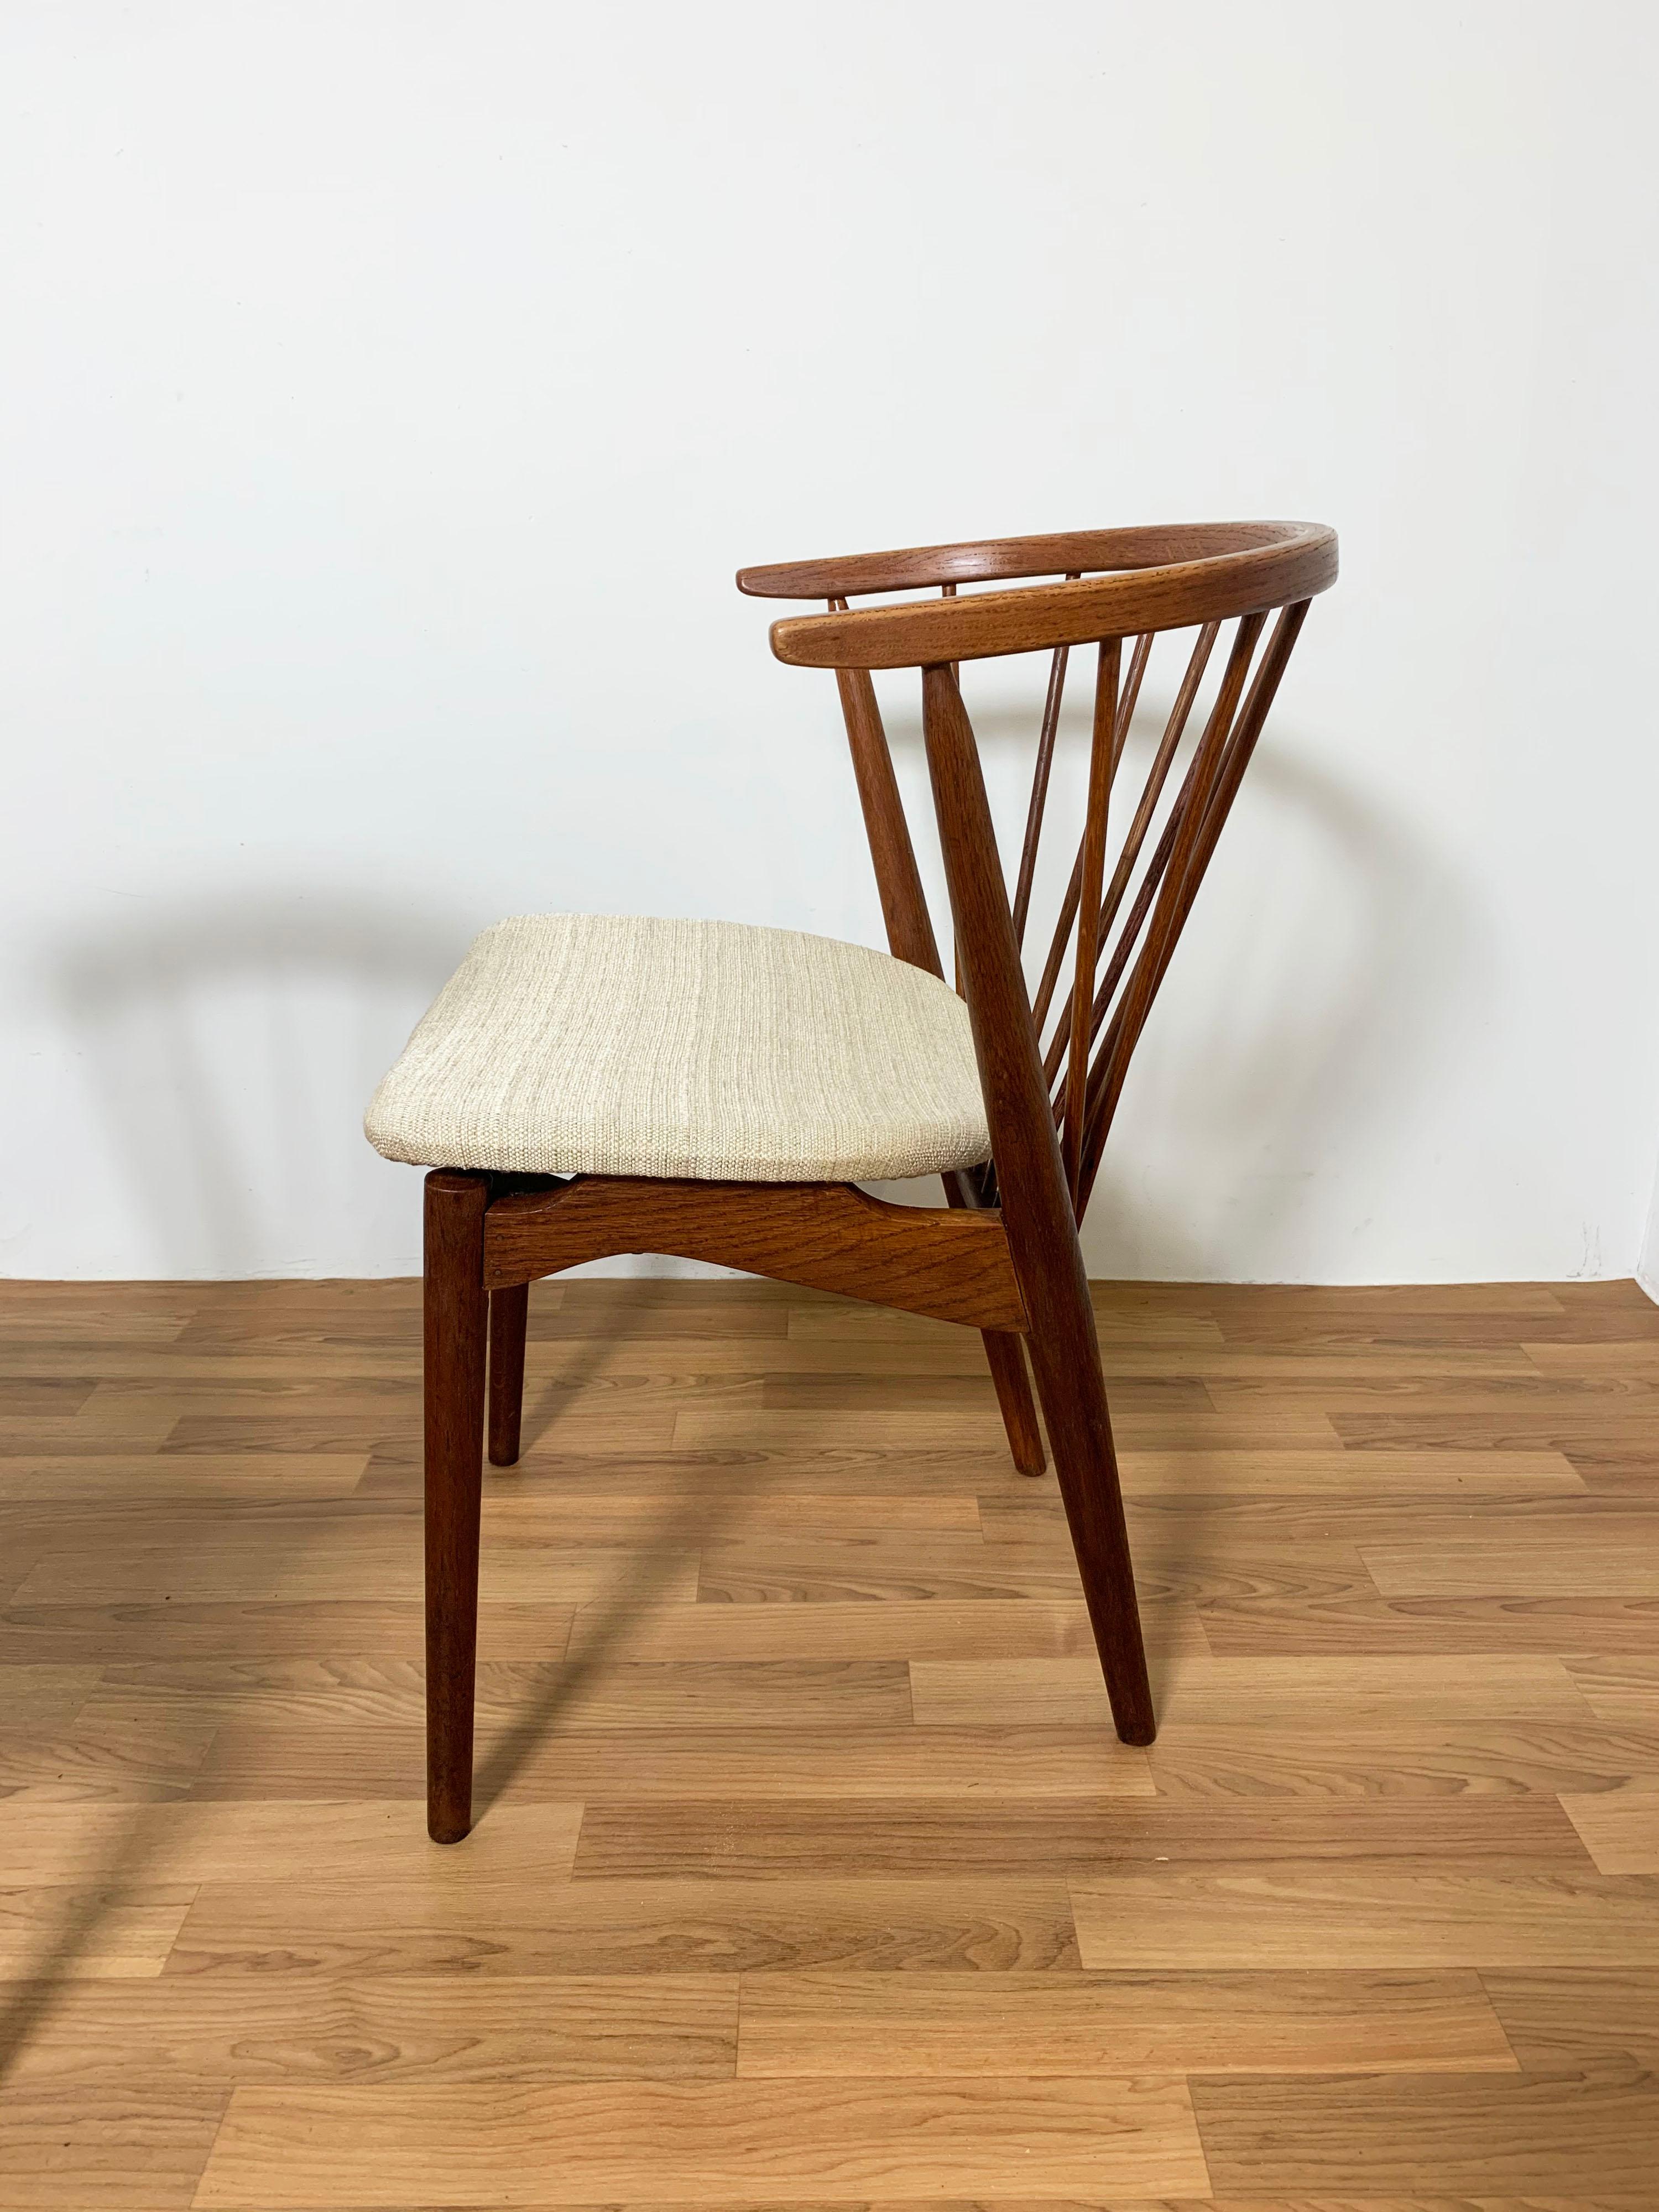 Set of four dining chairs designed by Helge Sibast for Sibast Mobler, Model No. 6, designed in 1953. Oak spindle back frames with newer upholstery.